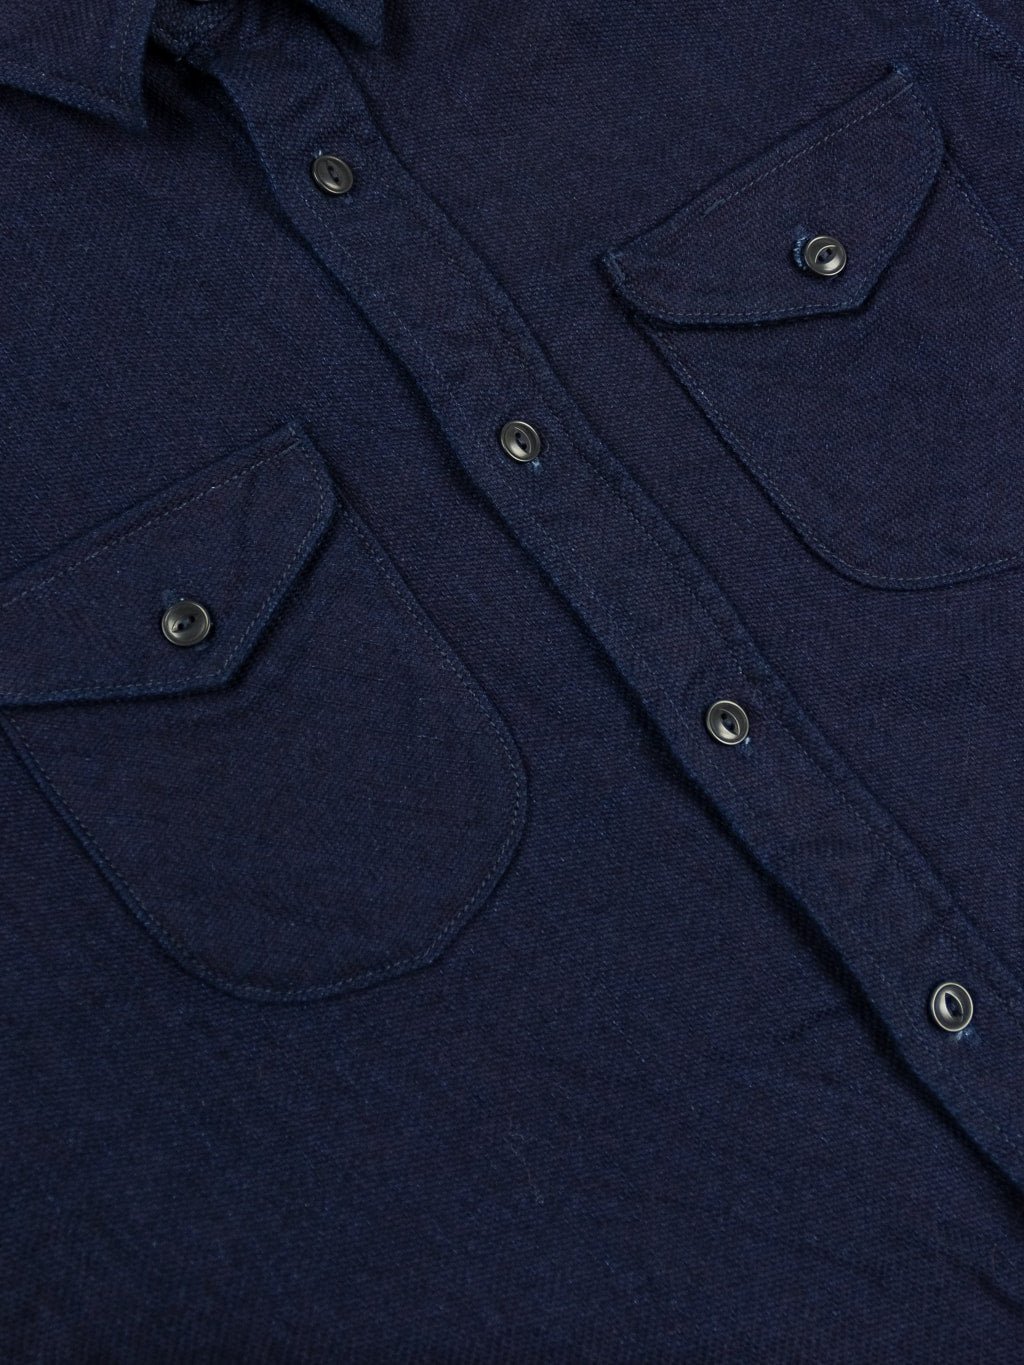 UES Indigo Heavy Selvedge Flannel Shirt palm nut buttons